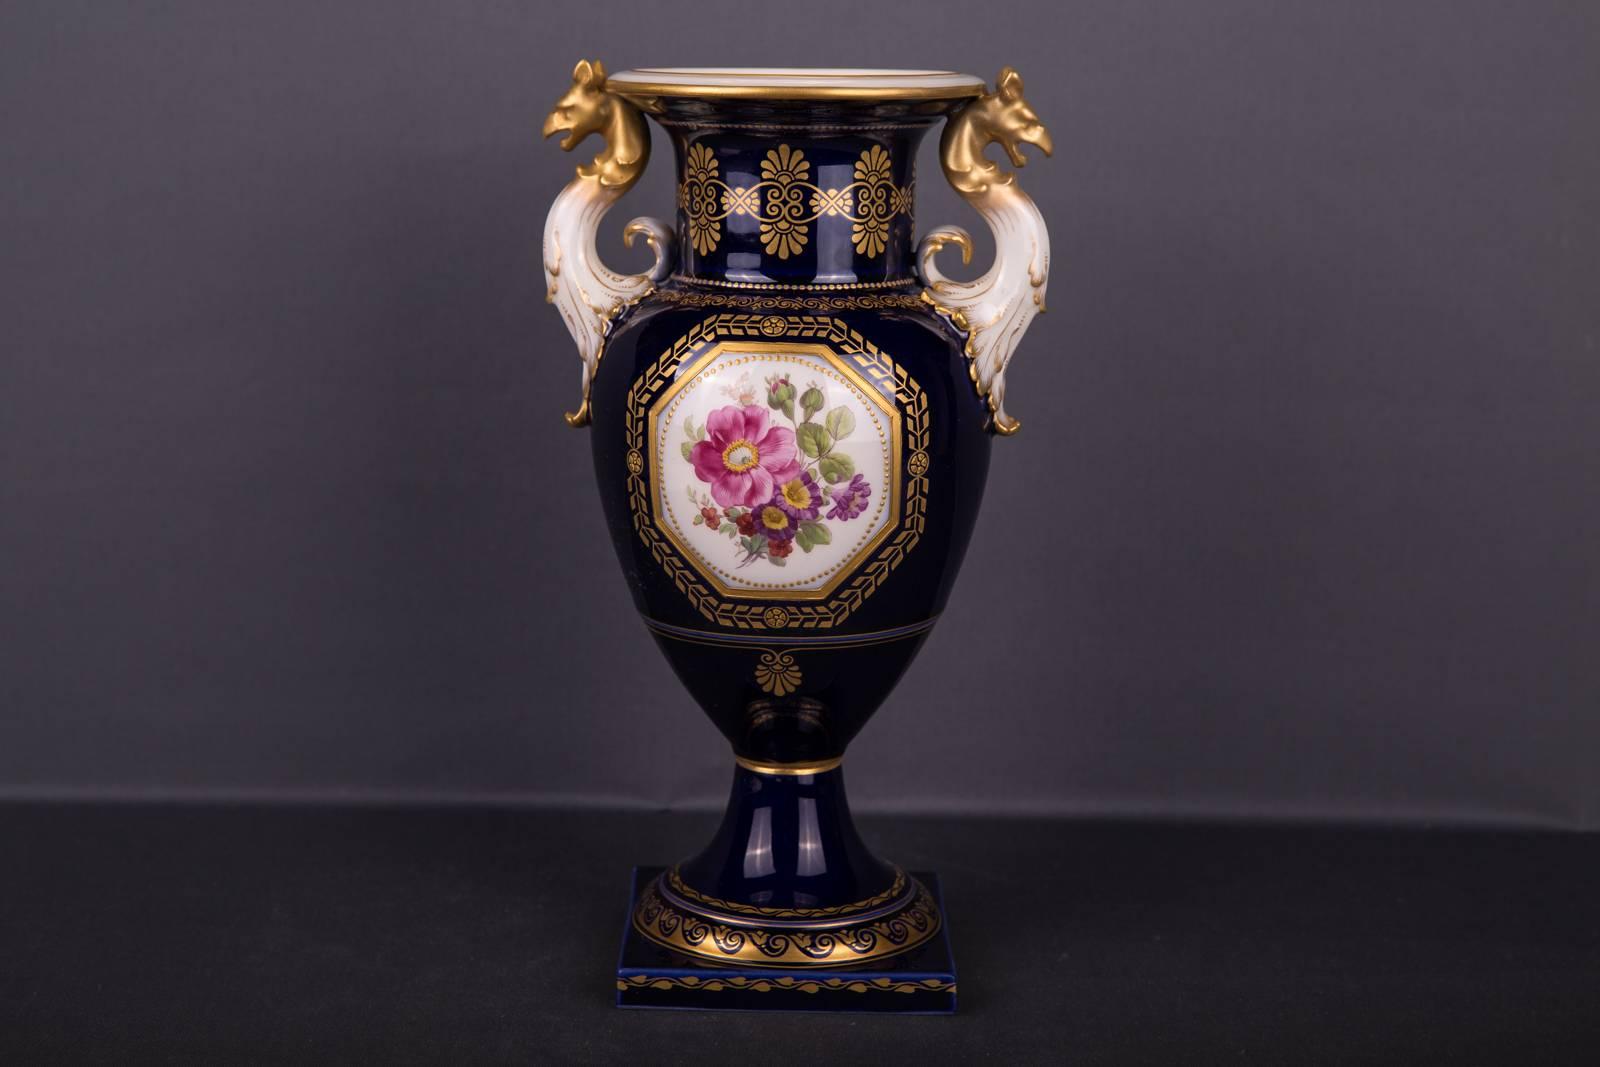 Magnificent KPM Berlin vase. In the center, on both sides magnificent flower bouquets on cobalt blue background.
Extremely elaborately decorated gold ornaments distributed throughout the body. Vase hand-drawn kite hanger.
KPM Berlin 1st choice